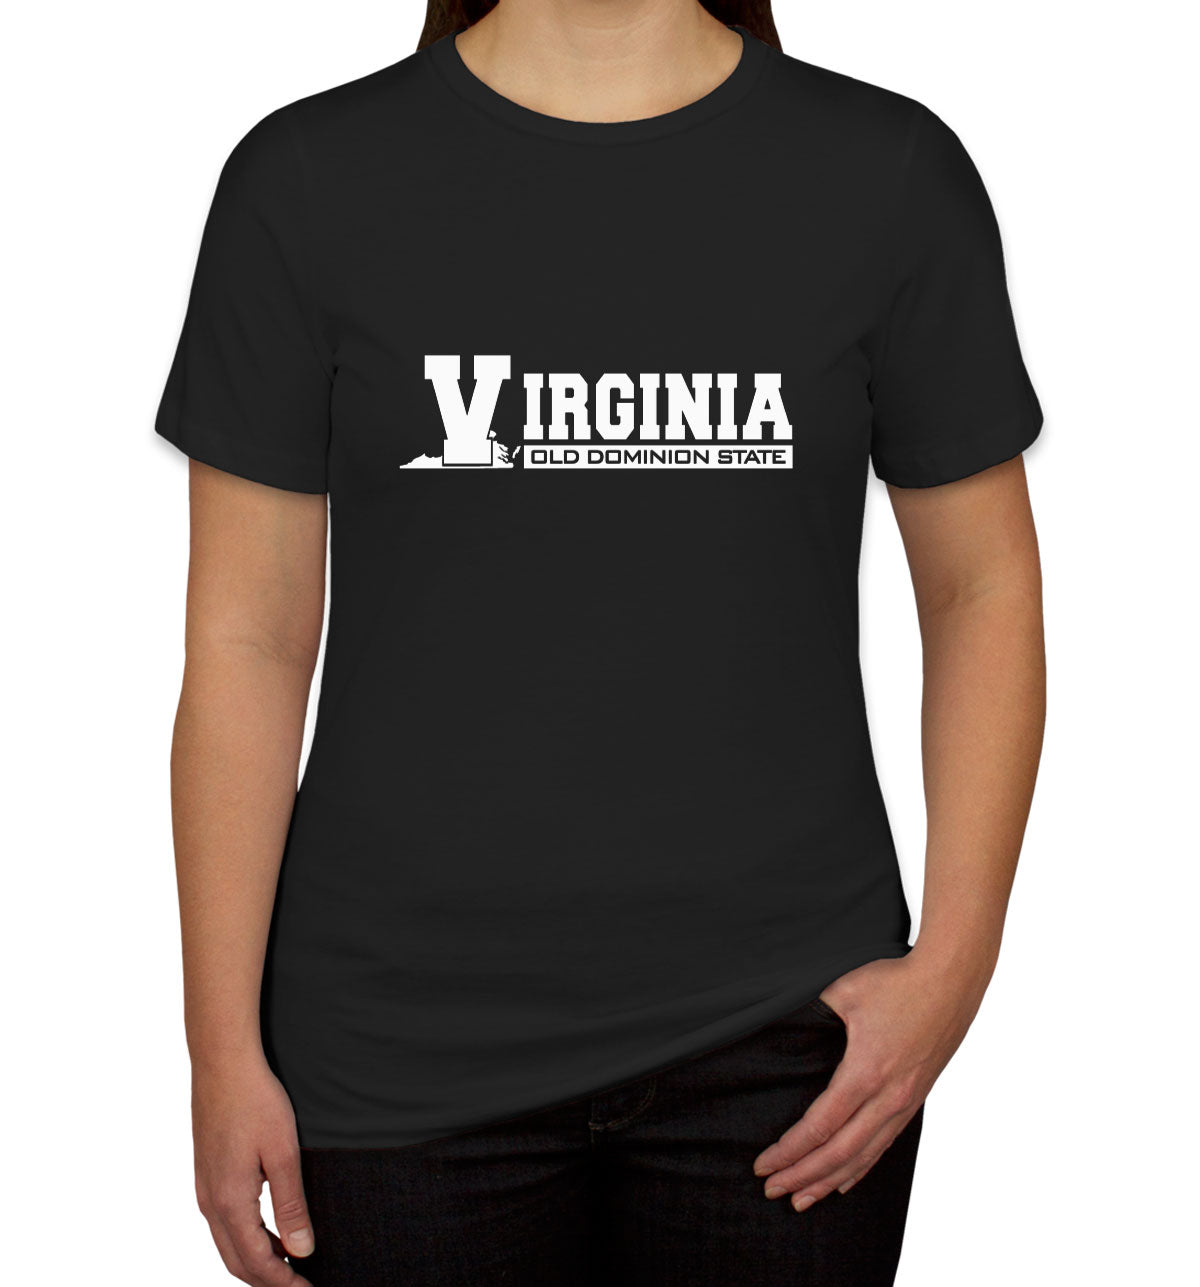 Virginia Old Dominion State Women's T-shirt